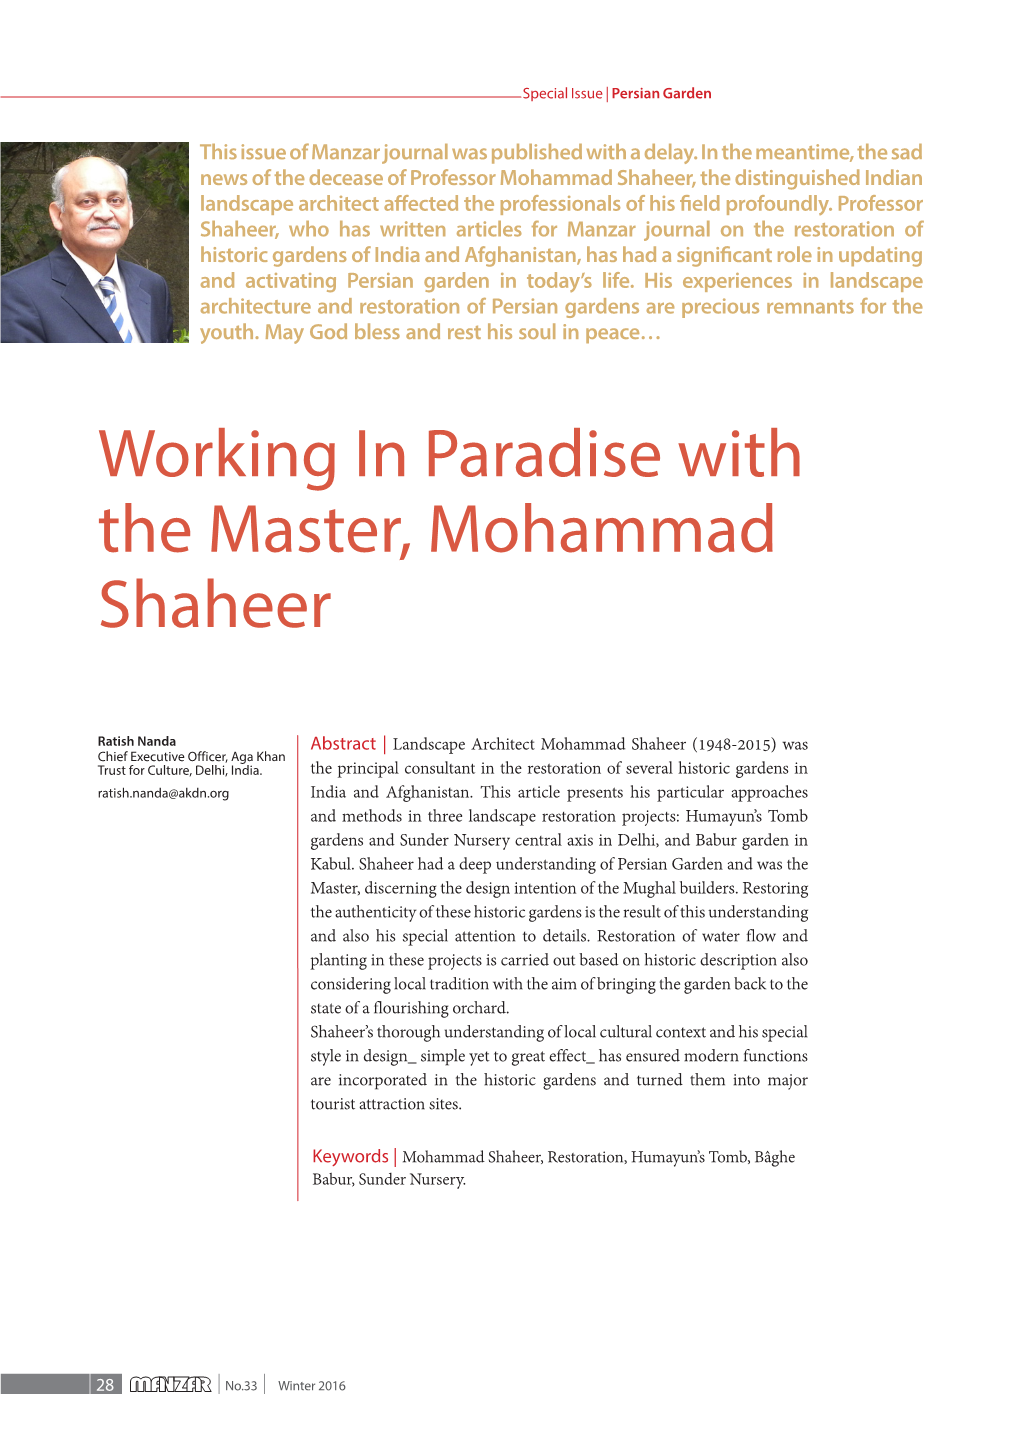 Working in Paradise with the Master, Mohammad Shaheer